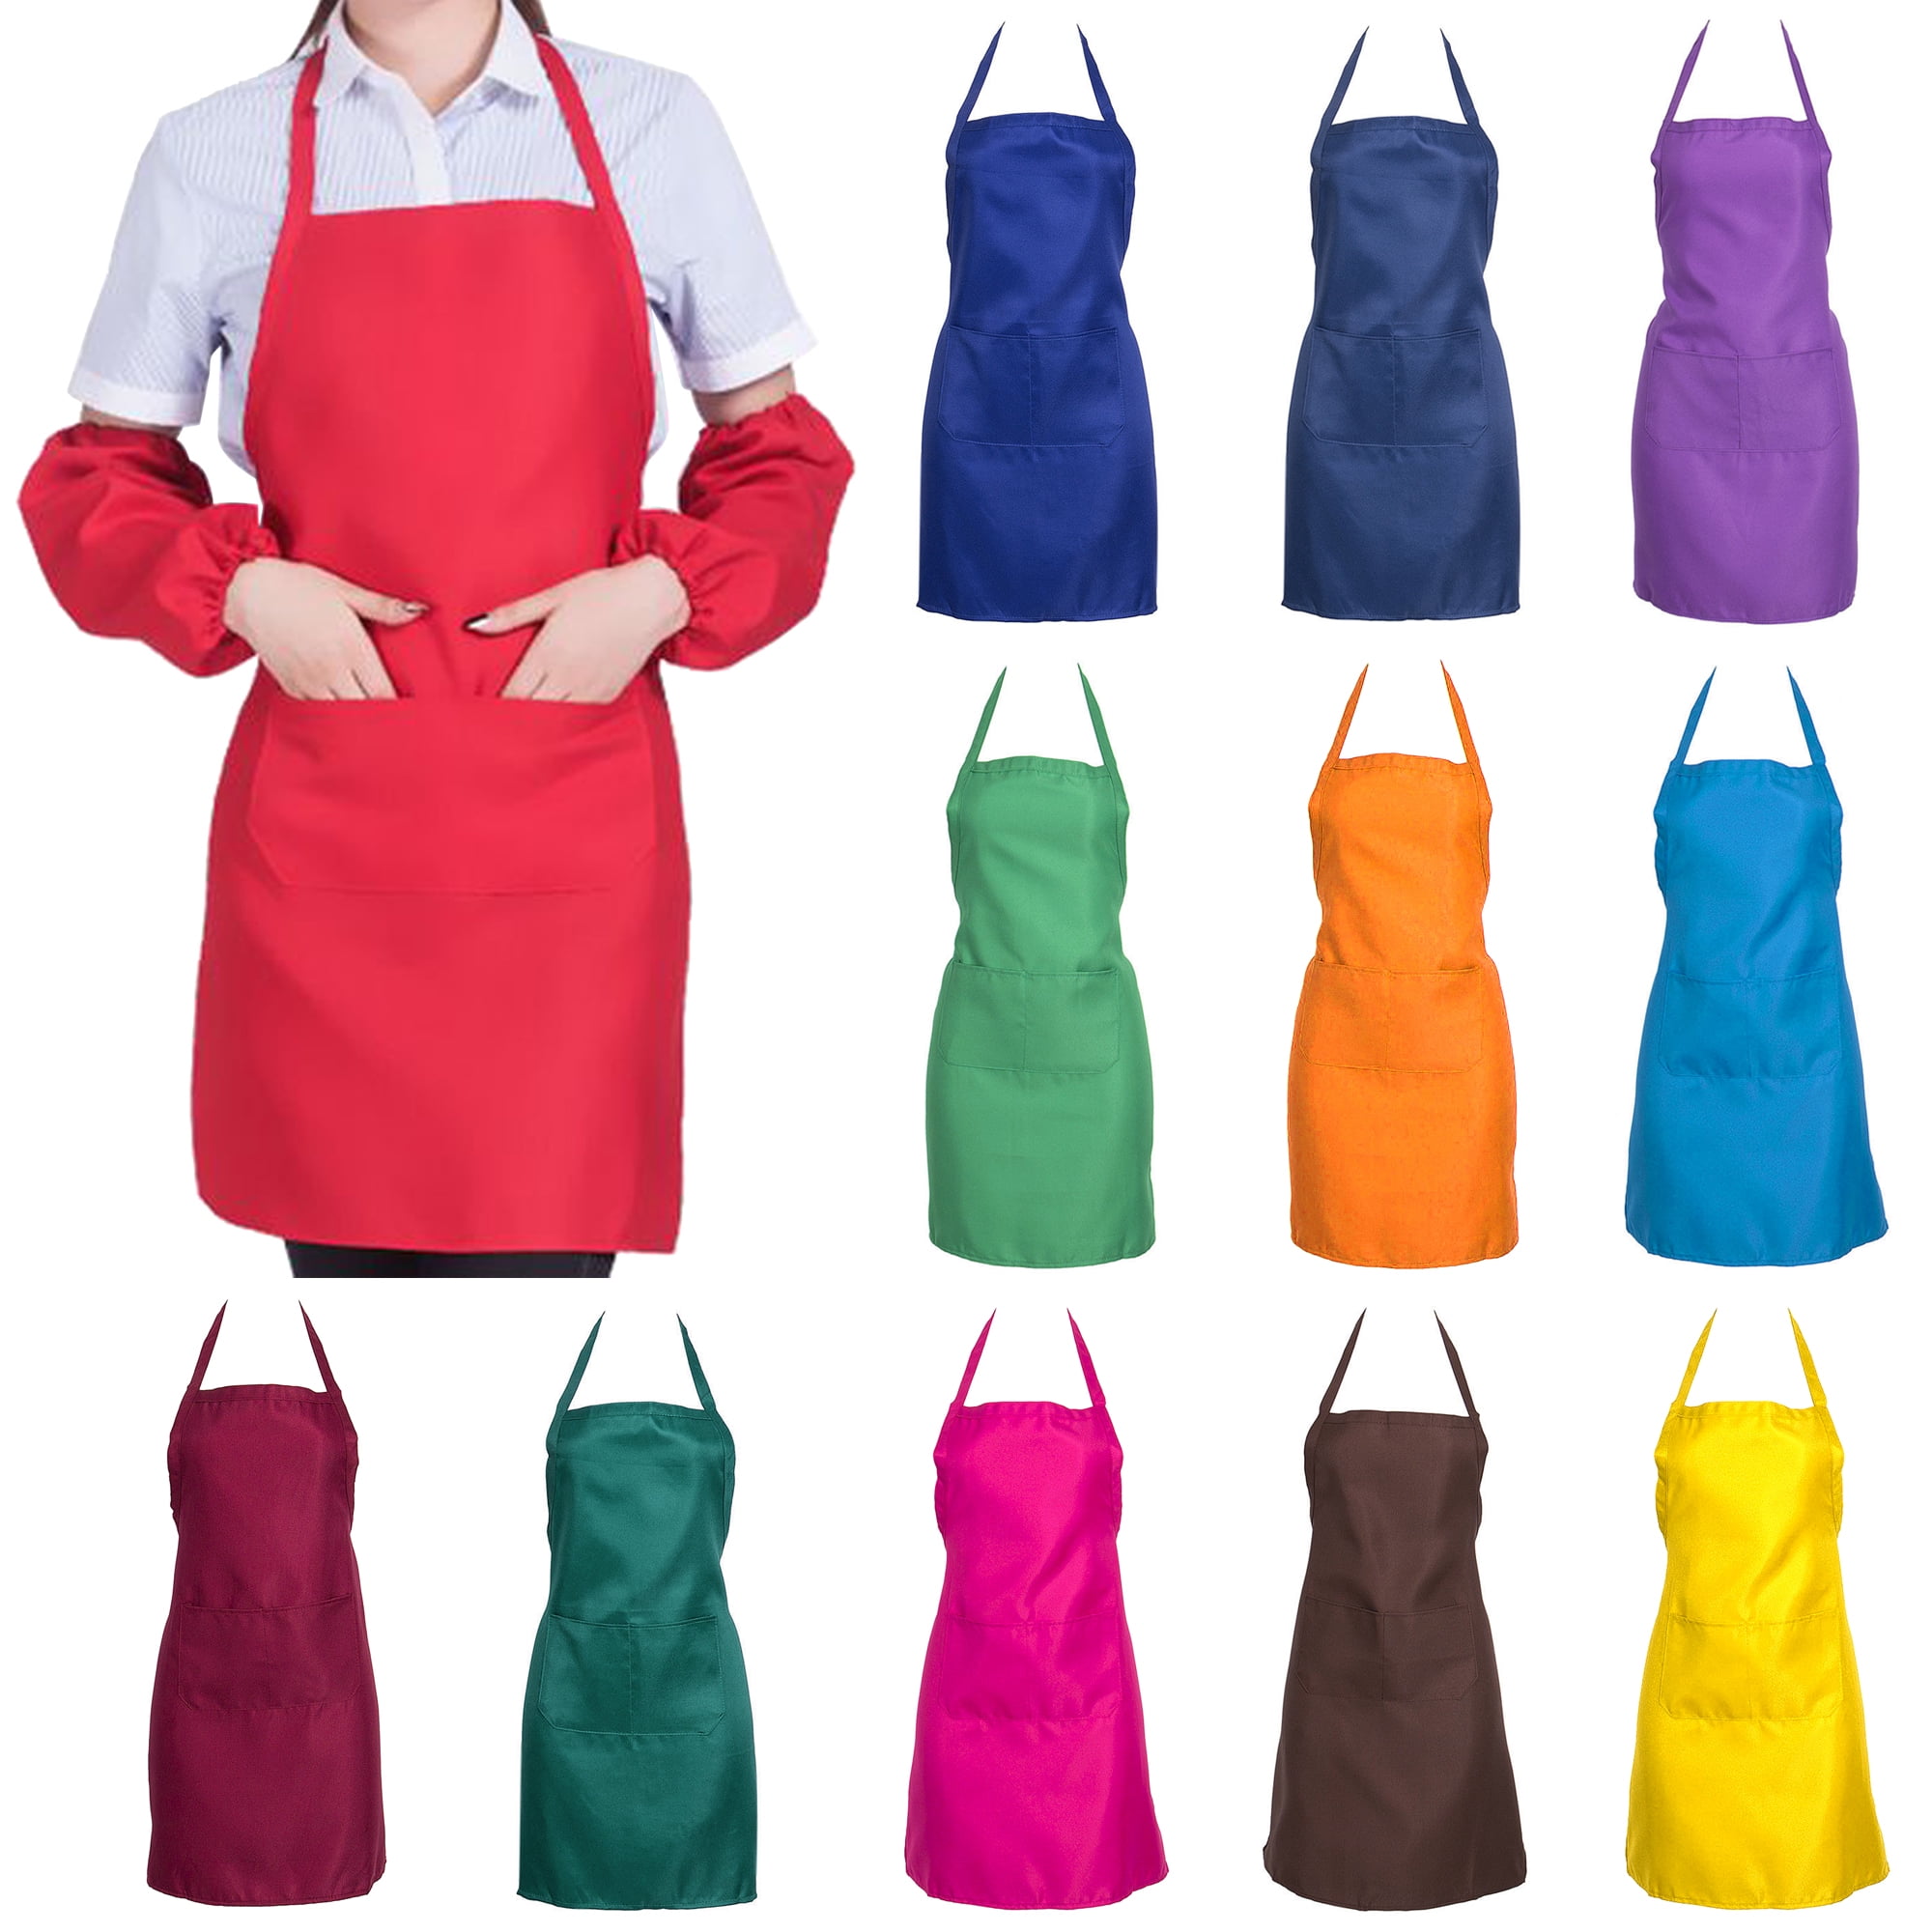 Men Women Catering Apron Front Pocket Chef Butcher Kitchen Cooking Craft Baking 